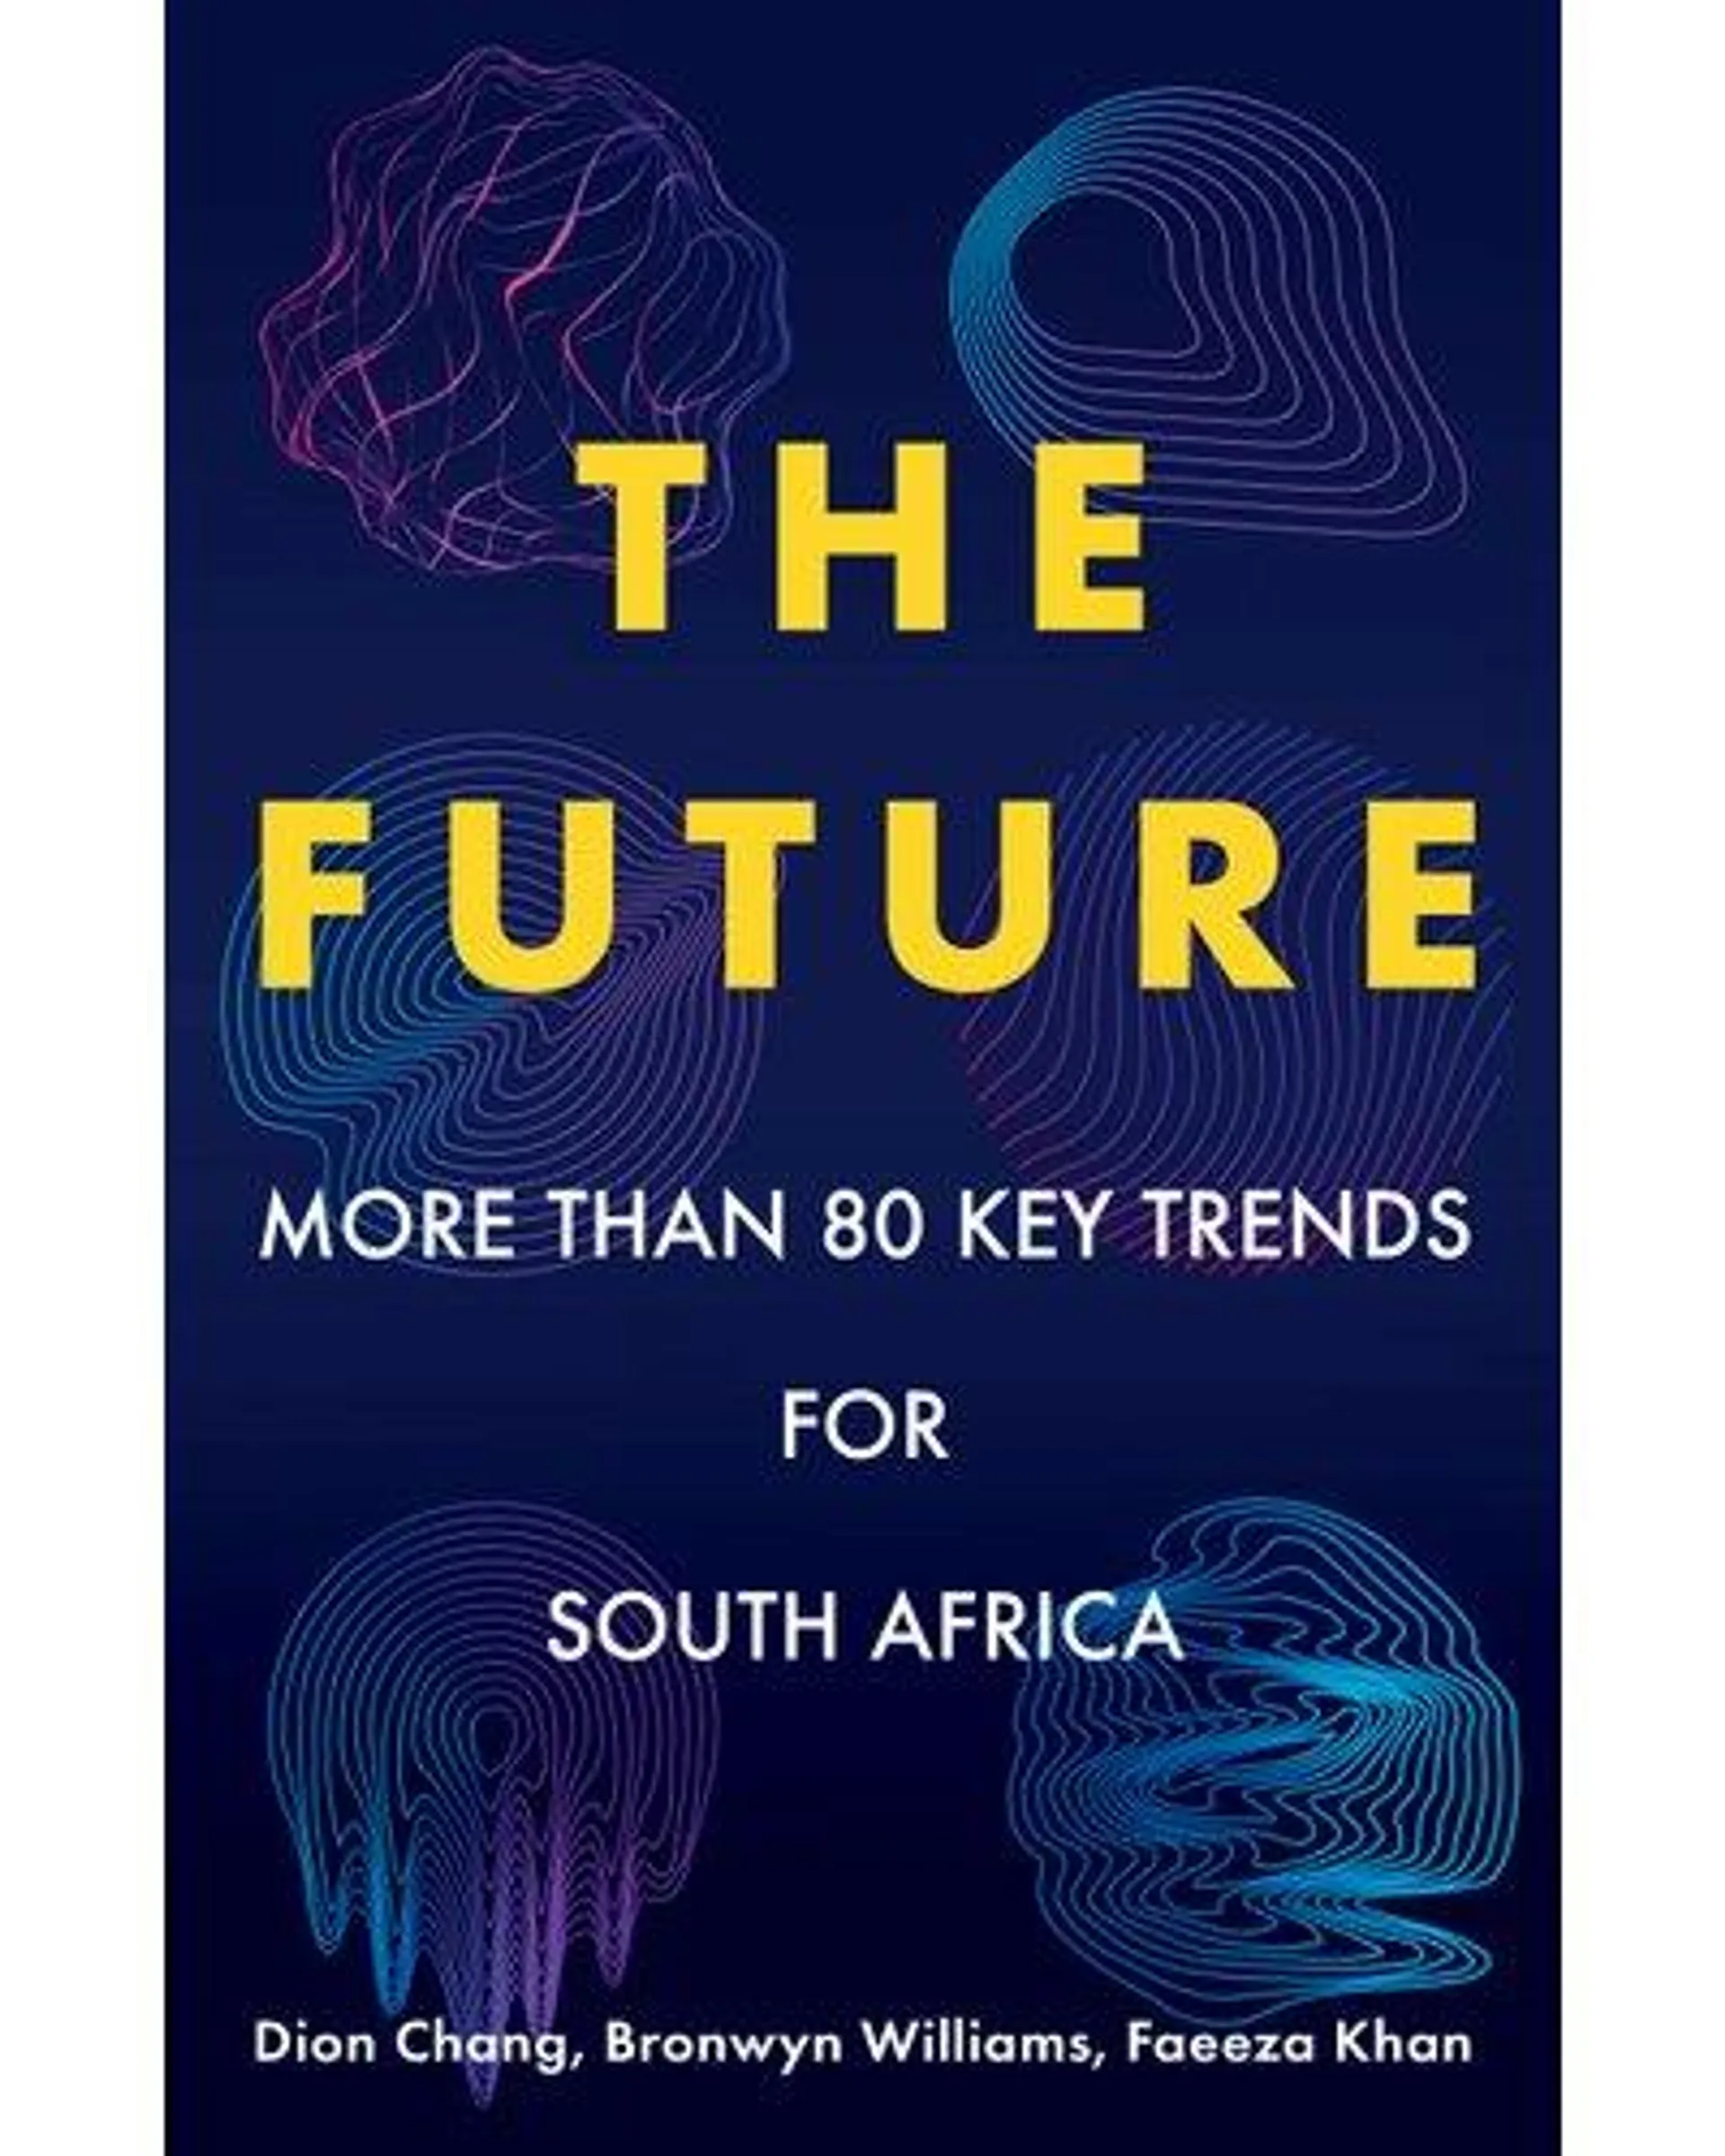 The Future - 60 Key Trends for South Africa (Paperback)